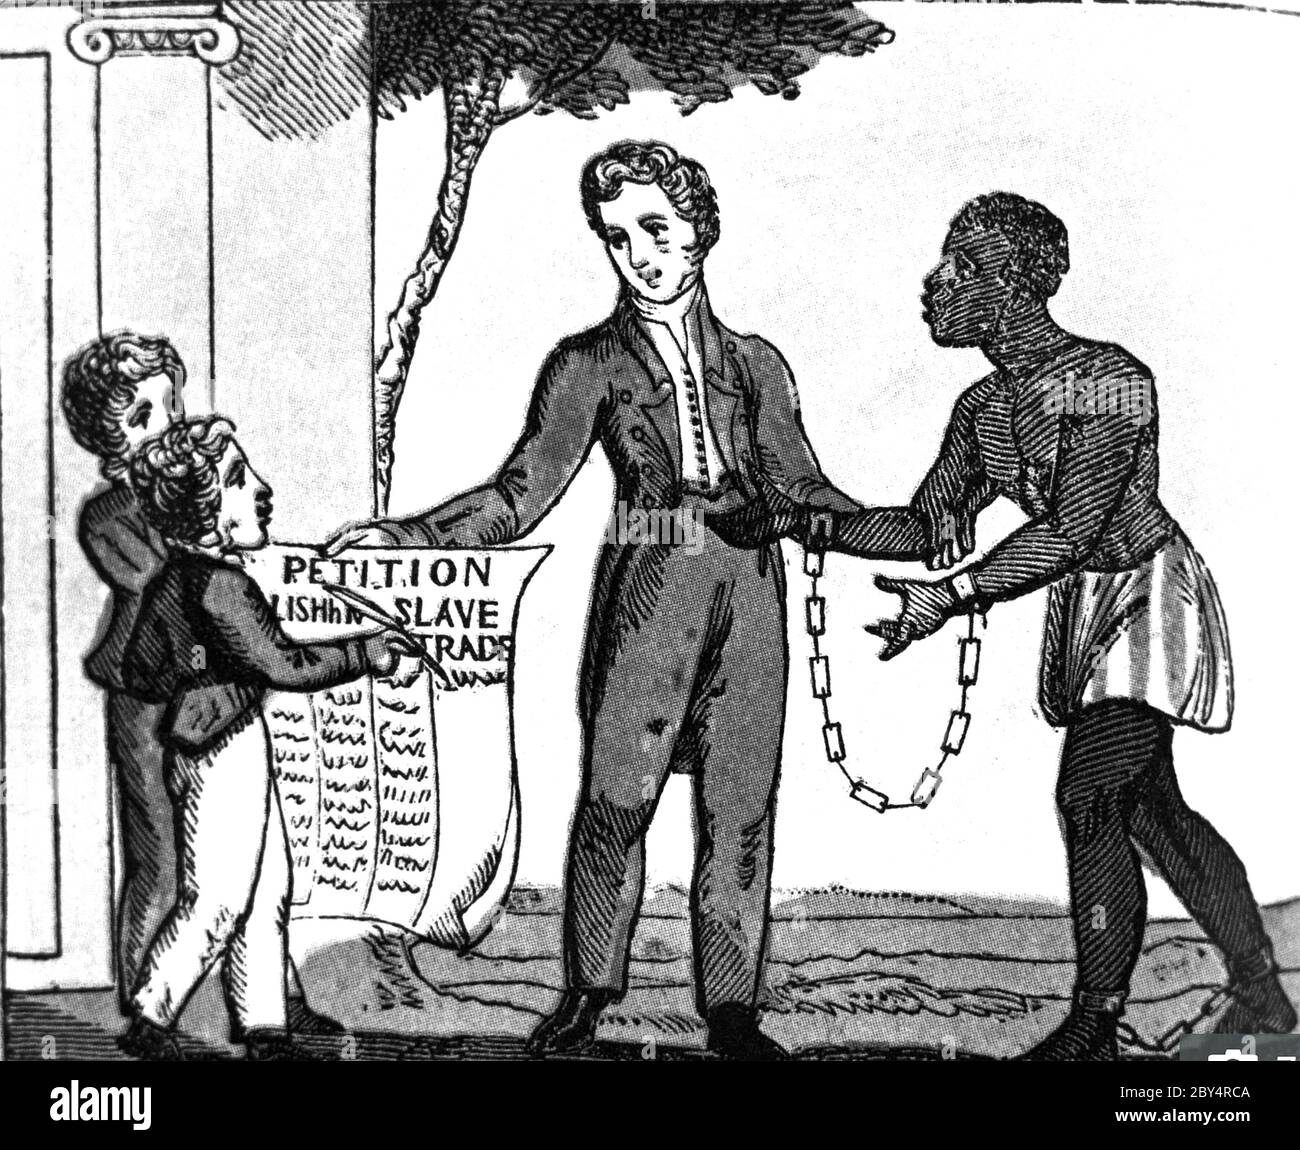 SLAVERY ABOLITION ACT 1833  An illustration from the 1826 book 'The Black Man's Lament, or, how to make sugar' by Amelia Opie. Hers was the first  of 187,000 names on a petition from women to stop slavery presented to the British Parliament. The Lament was in for the form of a poem. Stock Photo